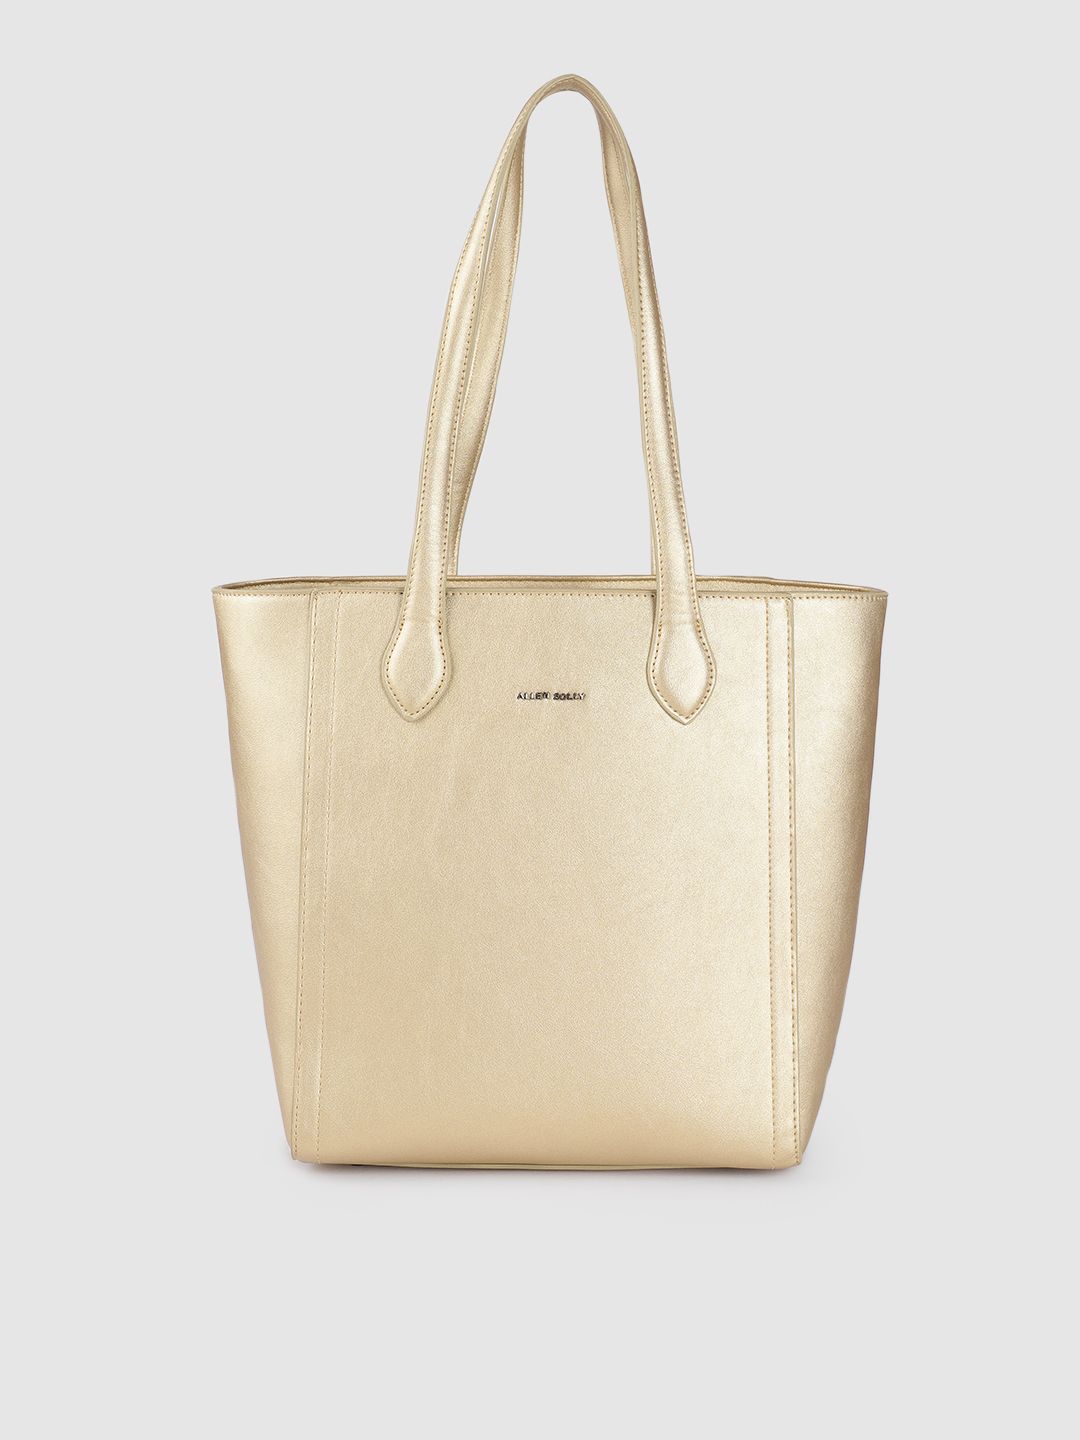 Allen Solly Champagne Solid PU Oversized Structured Shoulder Bag Price in India